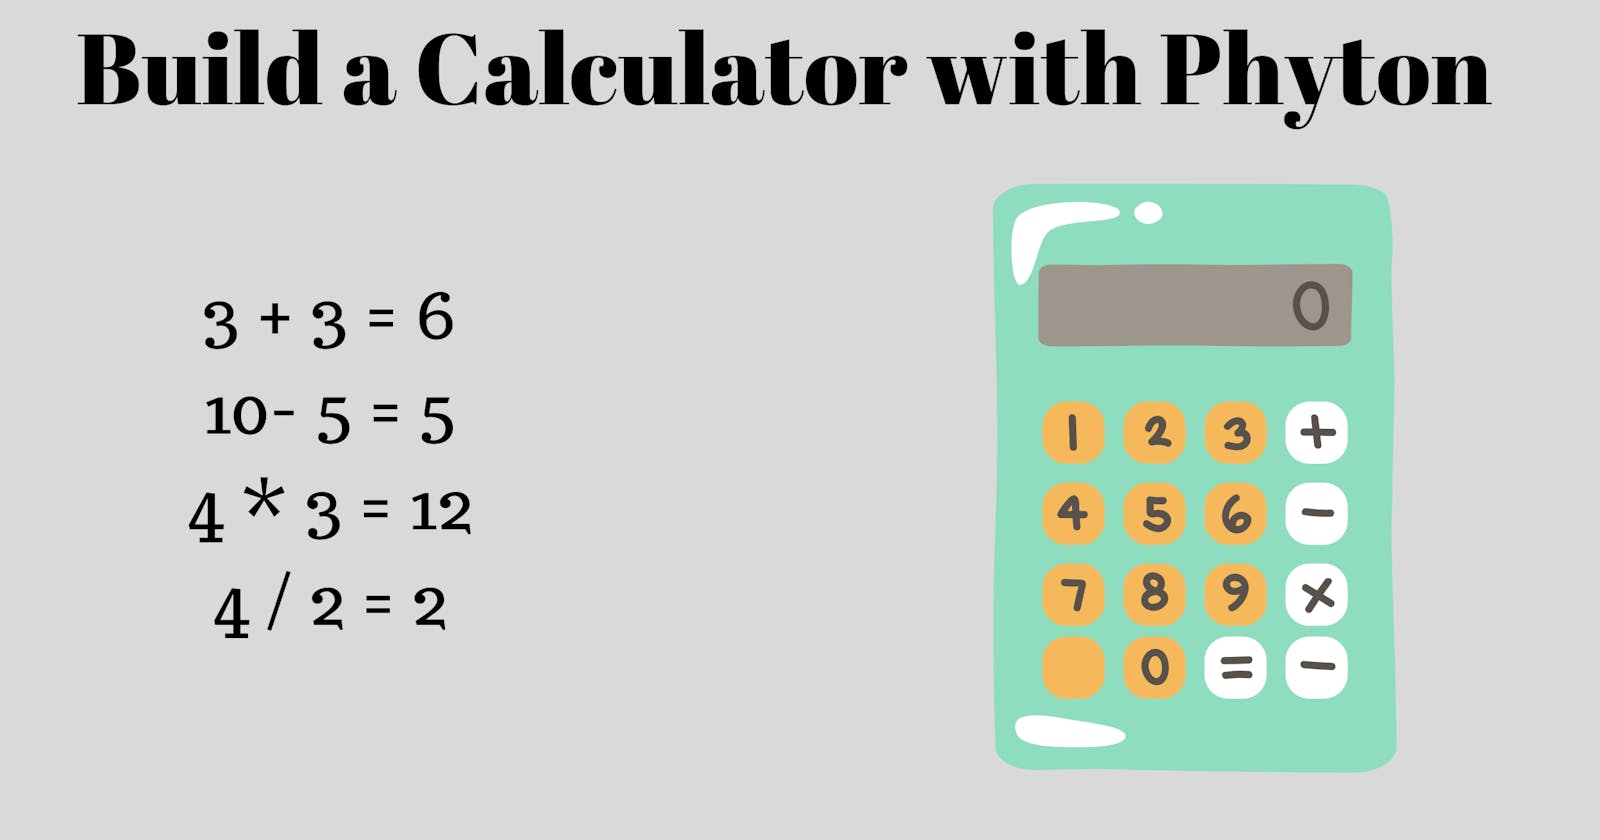 Step-by-Step Guide to Building a Calculator with Python